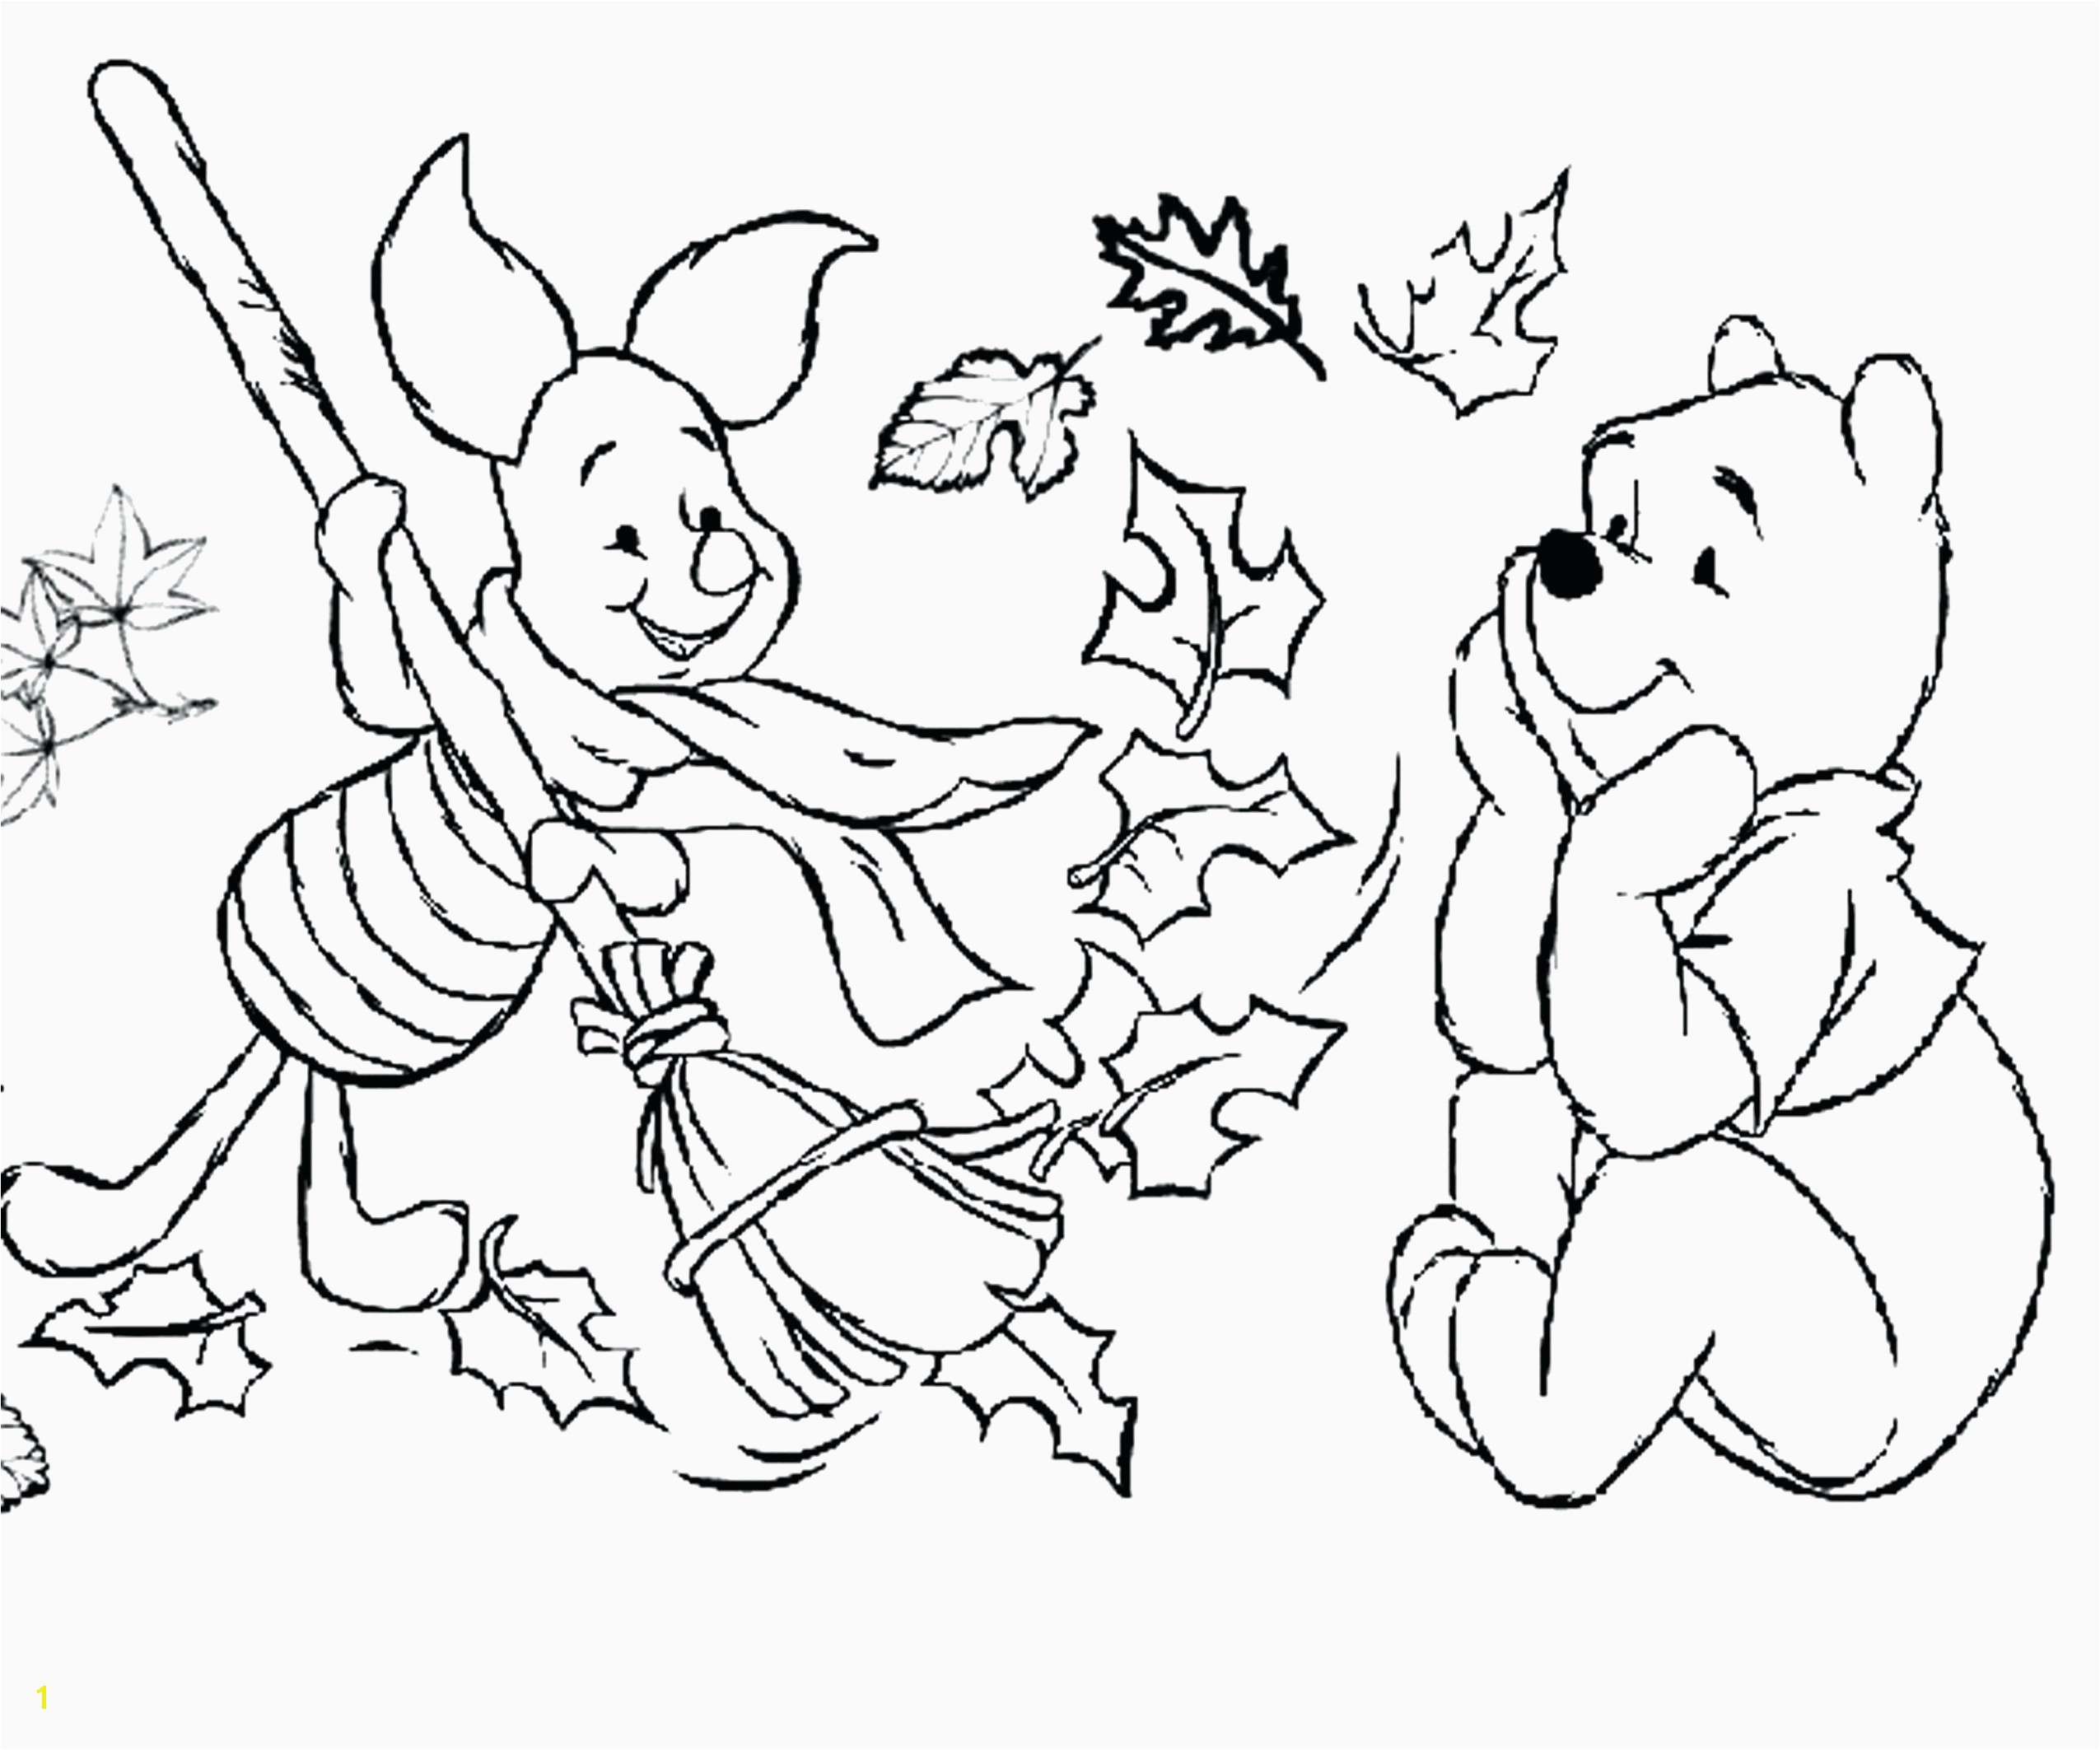 Baby Panda Coloring Pages Penguin Coloring Pages for Kids Coloring Pages